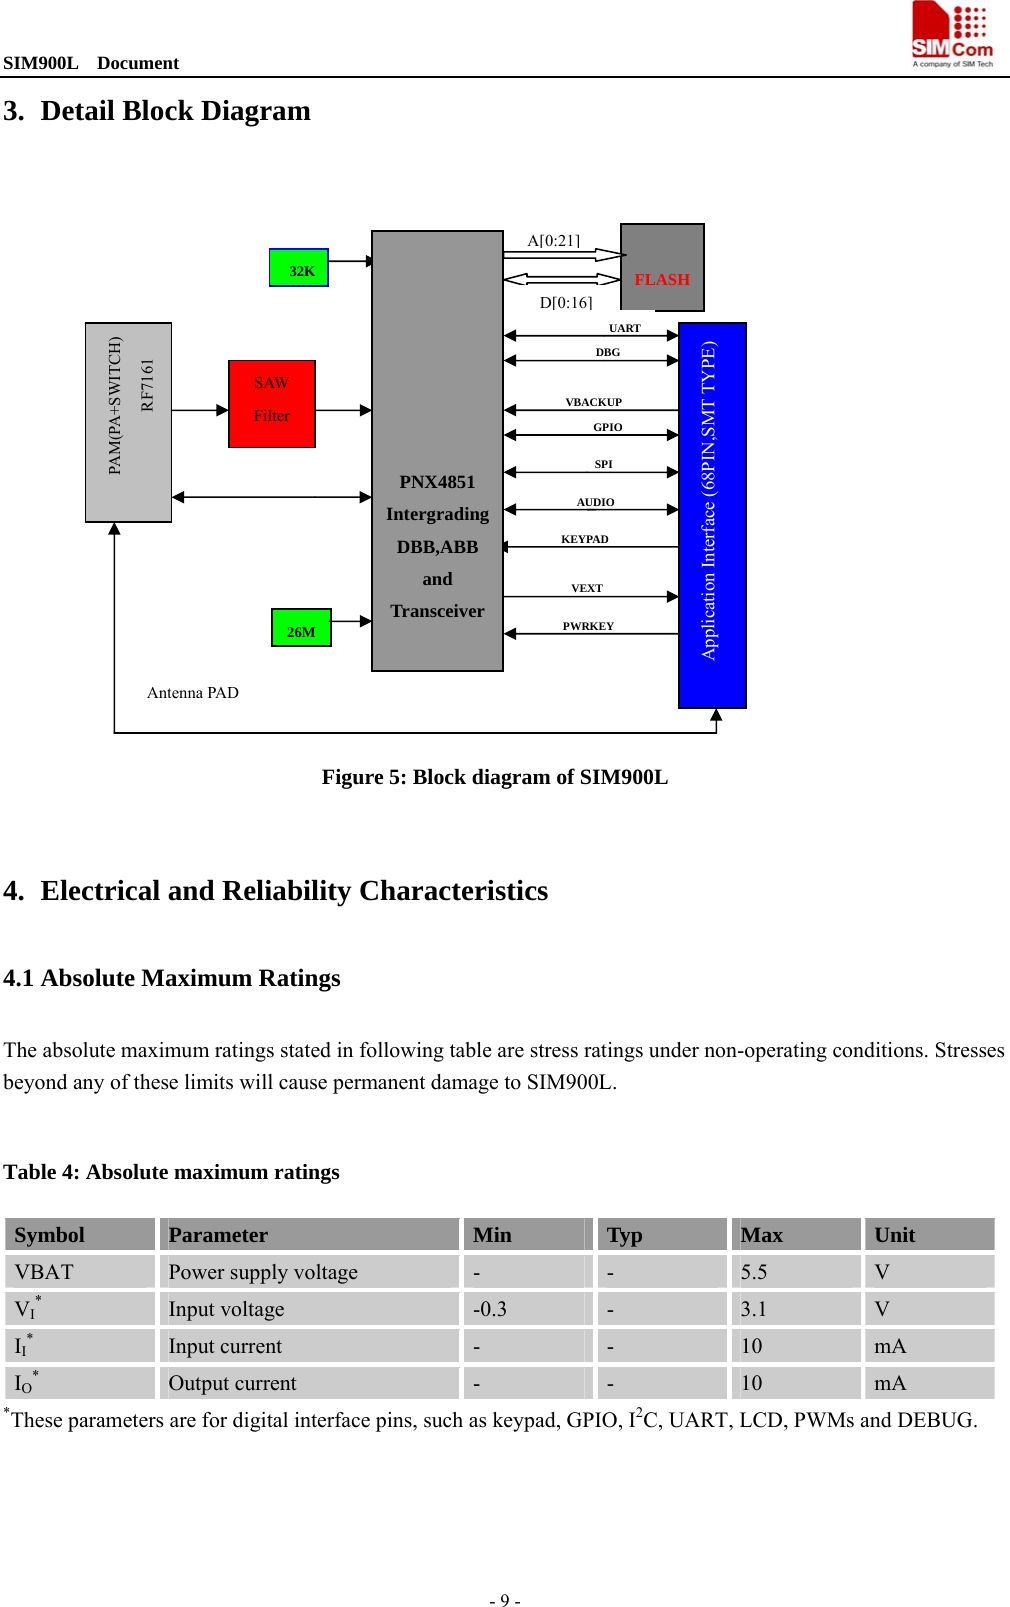 SIM900L  Document                                                                                - 9 - 3. Detail Block Diagram  Figure 5: Block diagram of SIM900L   4. Electrical and Reliability Characteristics 4.1 Absolute Maximum Ratings The absolute maximum ratings stated in following table are stress ratings under non-operating conditions. Stresses beyond any of these limits will cause permanent damage to SIM900L.  Table 4: Absolute maximum ratings Symbol  Parameter  Min  Typ  Max  Unit VBAT  Power supply voltage  -  -  5.5  V VI* Input voltage  -0.3  -  3.1  V II* Input current  -  -  10  mA IO* Output current  -  -  10  mA *These parameters are for digital interface pins, such as keypad, GPIO, I2C, UART, LCD, PWMs and DEBUG. 26M 32K FLASHApplication Interface (68PIN,SMT TYPE) A[0:21]D[0:16]UART DBGVBACKUPGPIOSPIAUDIOVEXTKEYPADPWRKEYPAM(PA+SW ITCH)     RF7161              PNX4851 Intergrading DBB,ABB and TransceiverSAW Filter Antenna PAD 